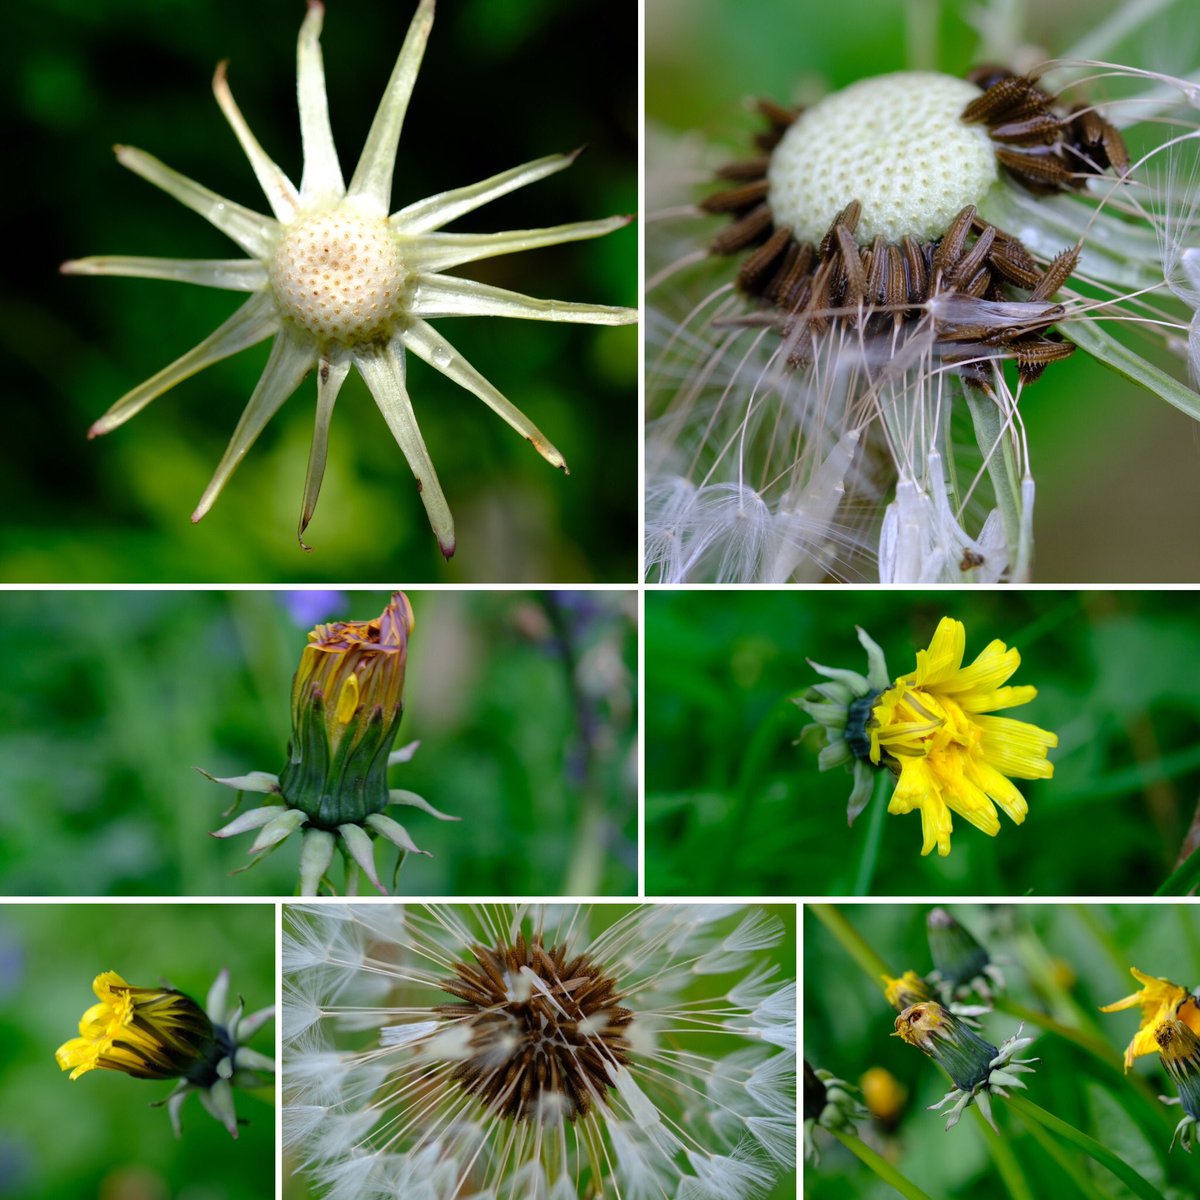 @wildflower_hour #DandelionChallenge on my local walk this pm after the heavy overnight rain the dandelions have mostly gone over. But it’s a chance to see the ribbed fruit and parachute of white hairs ready to be dispersed by the wind. Now what time is it?